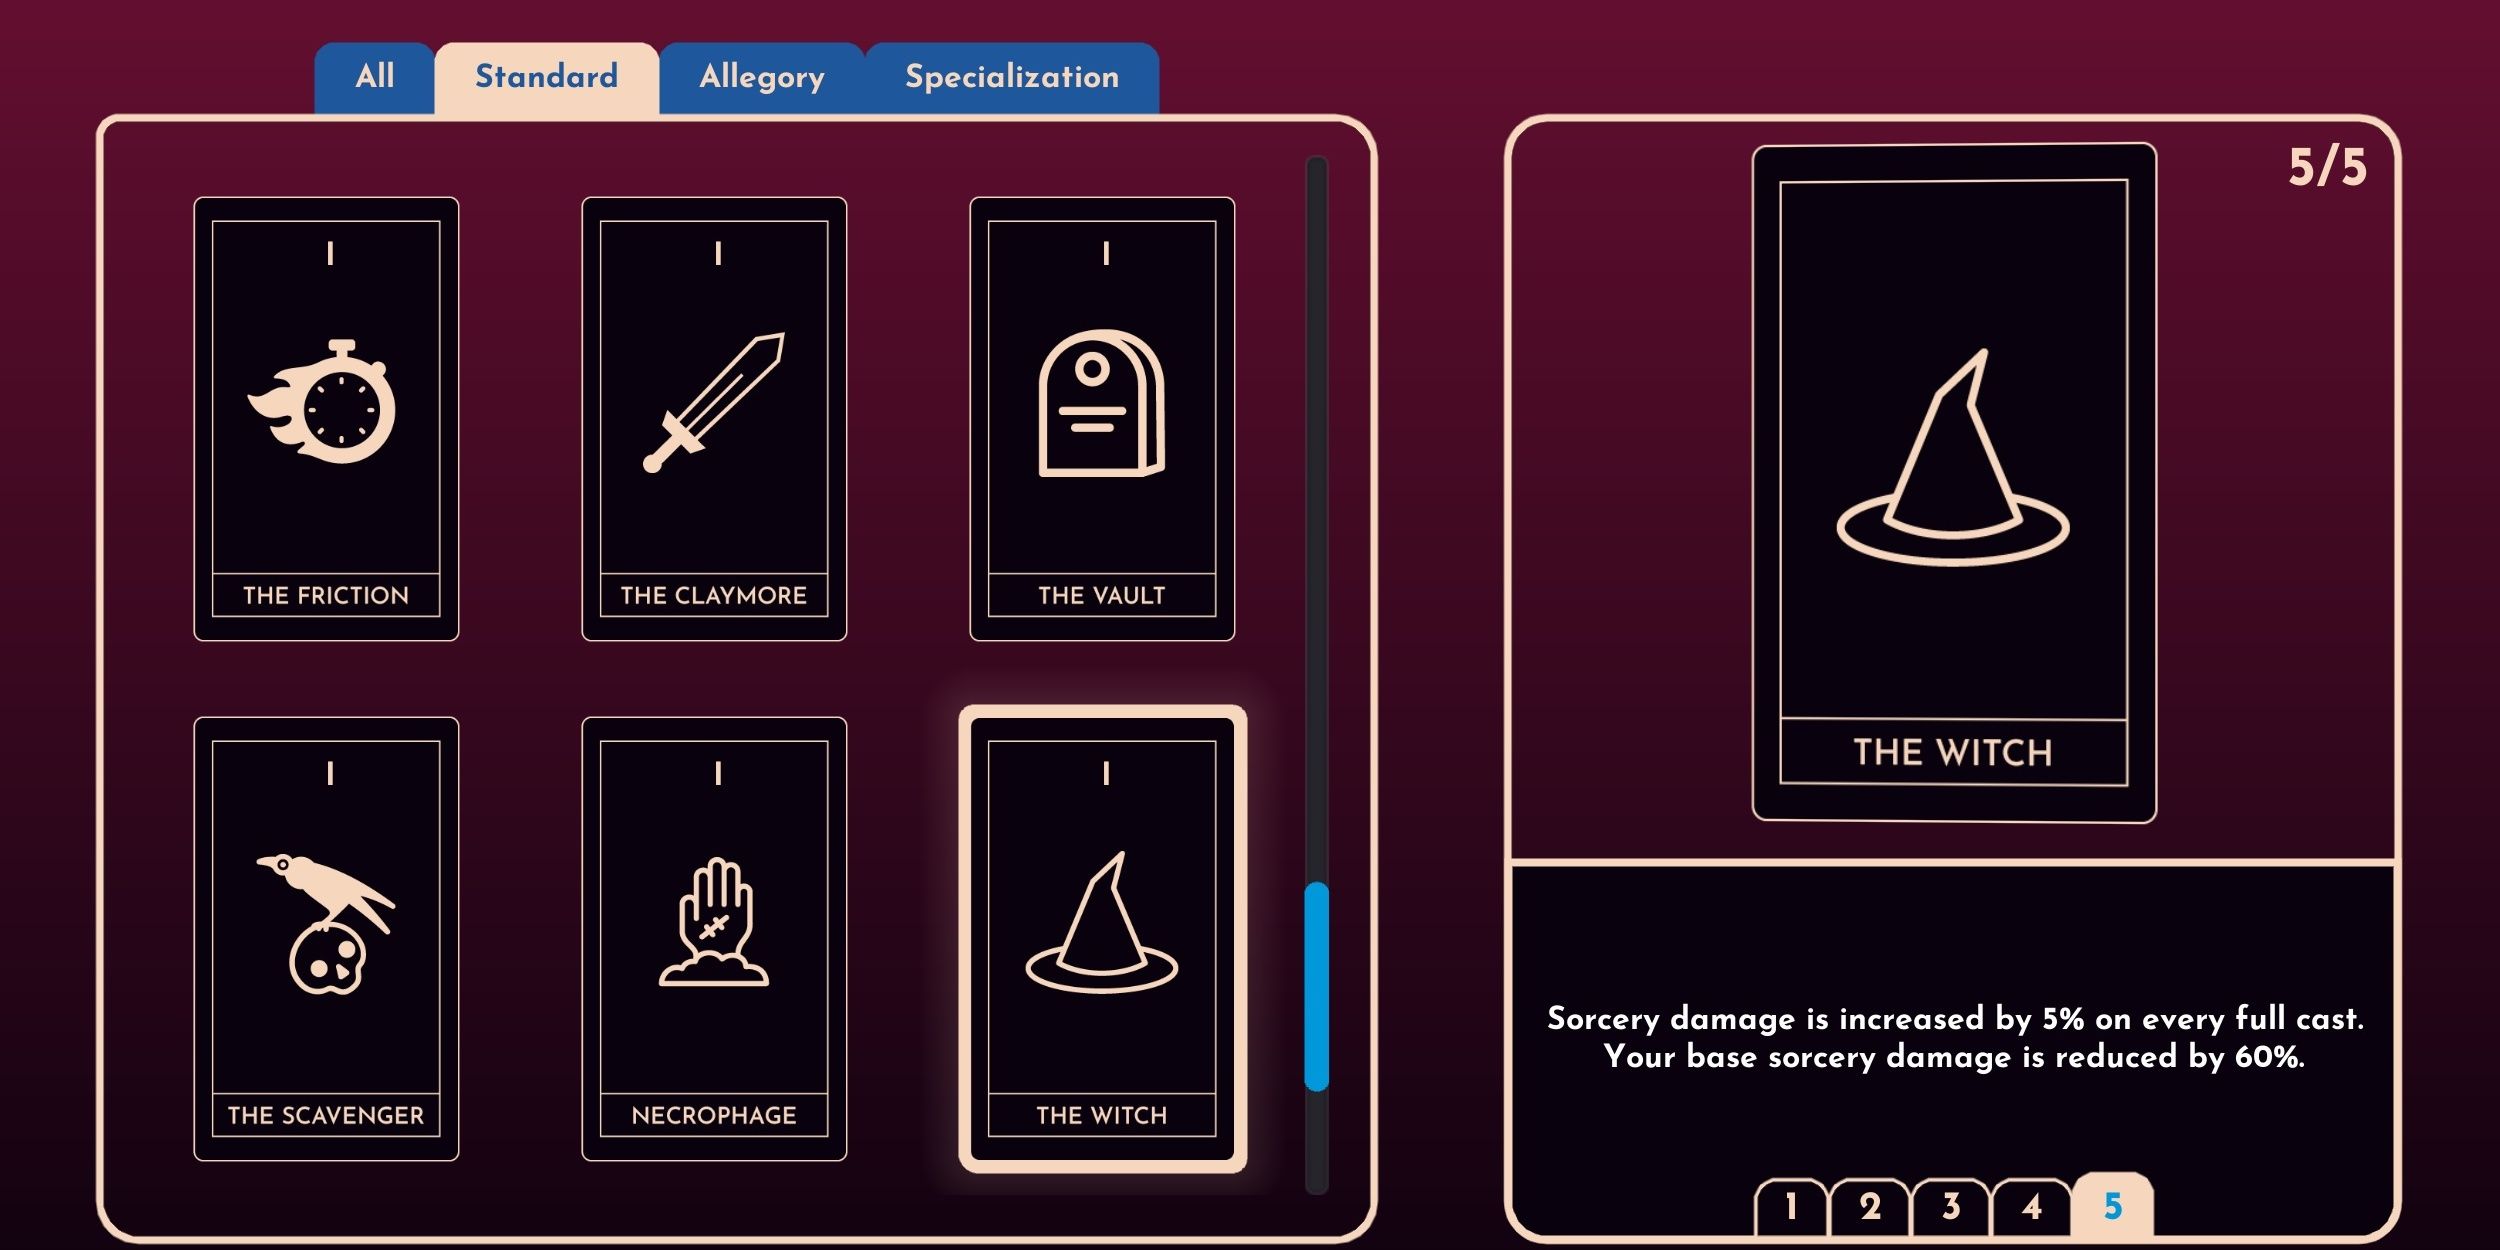 The Witch card in the card viewer